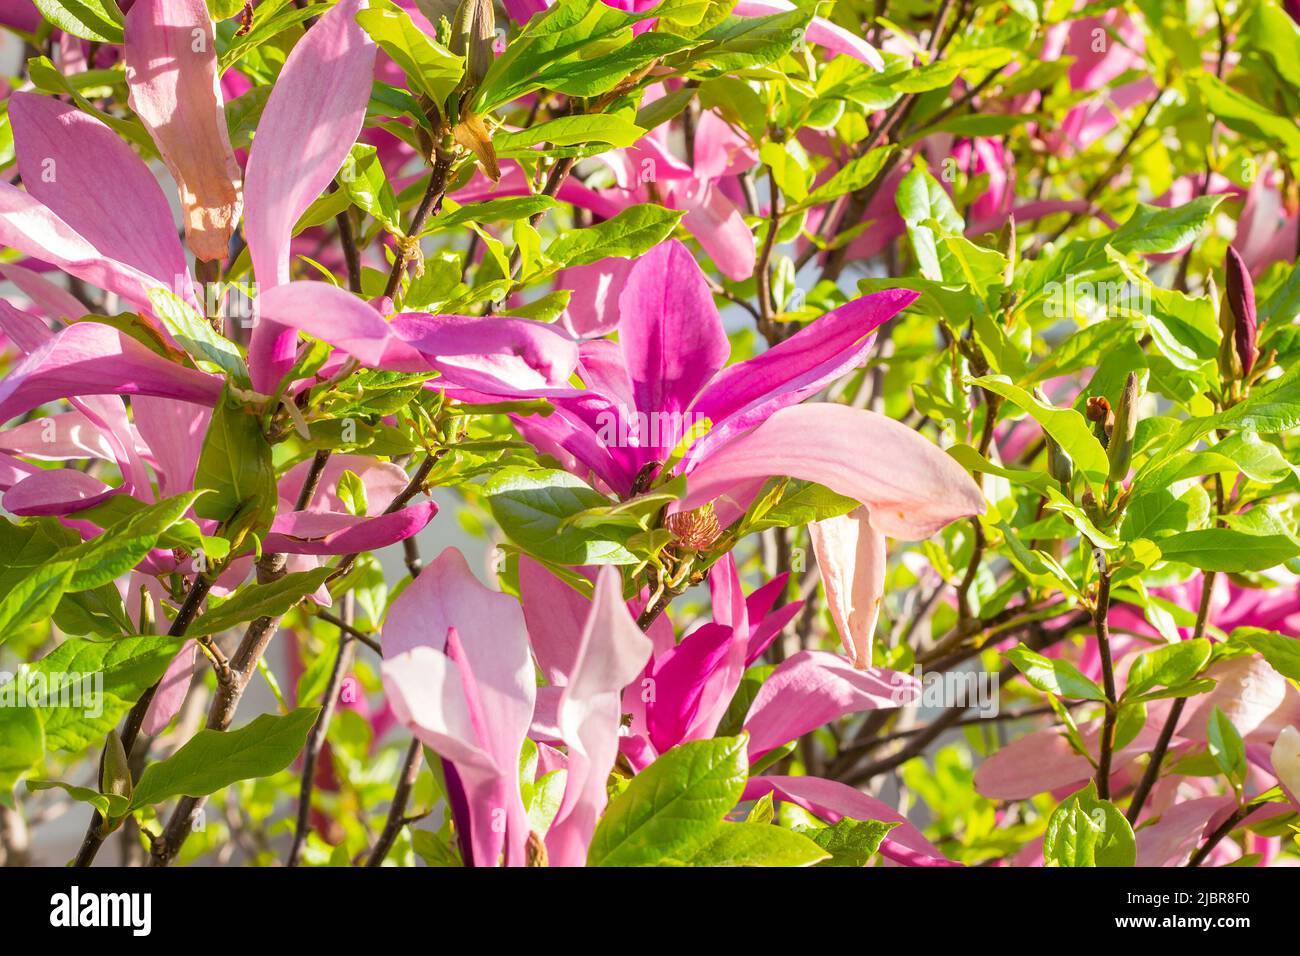 Bright pink Magnolia Susan liliiflora flowers with green leaves in the garden in spring. Stock Photo